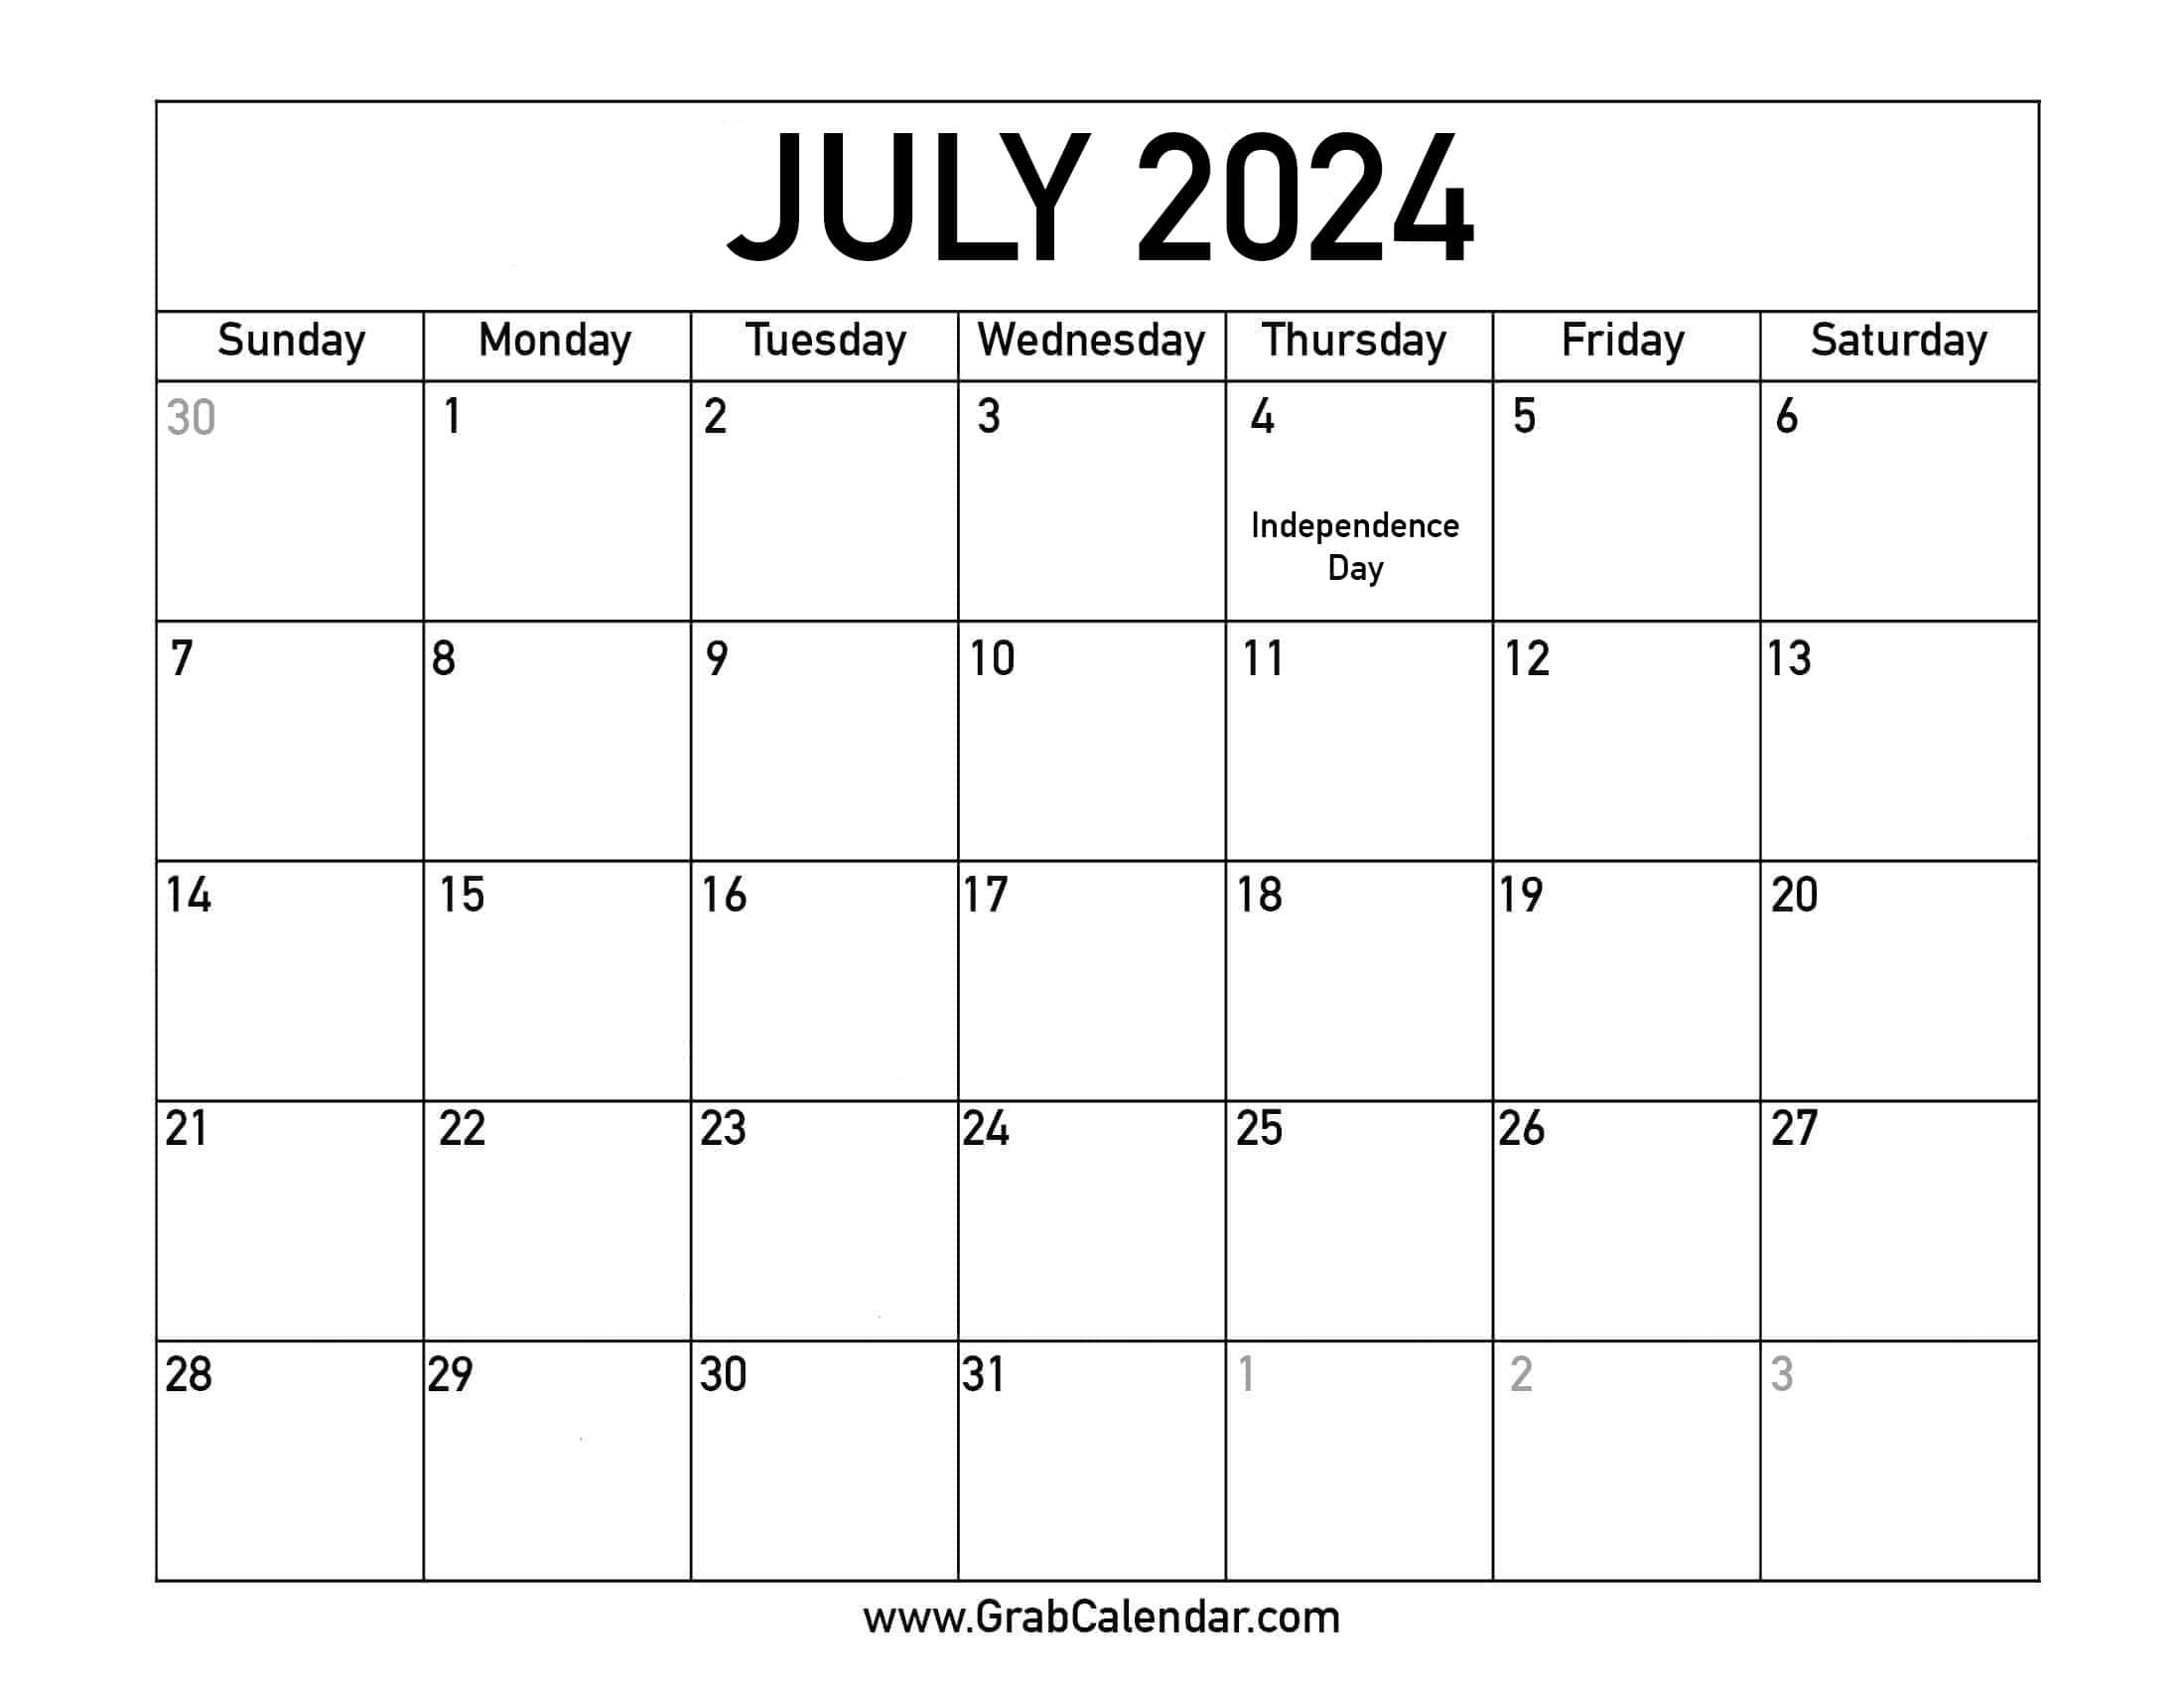 Printable July 2024 Calendar intended for Calendar Events in July 2024